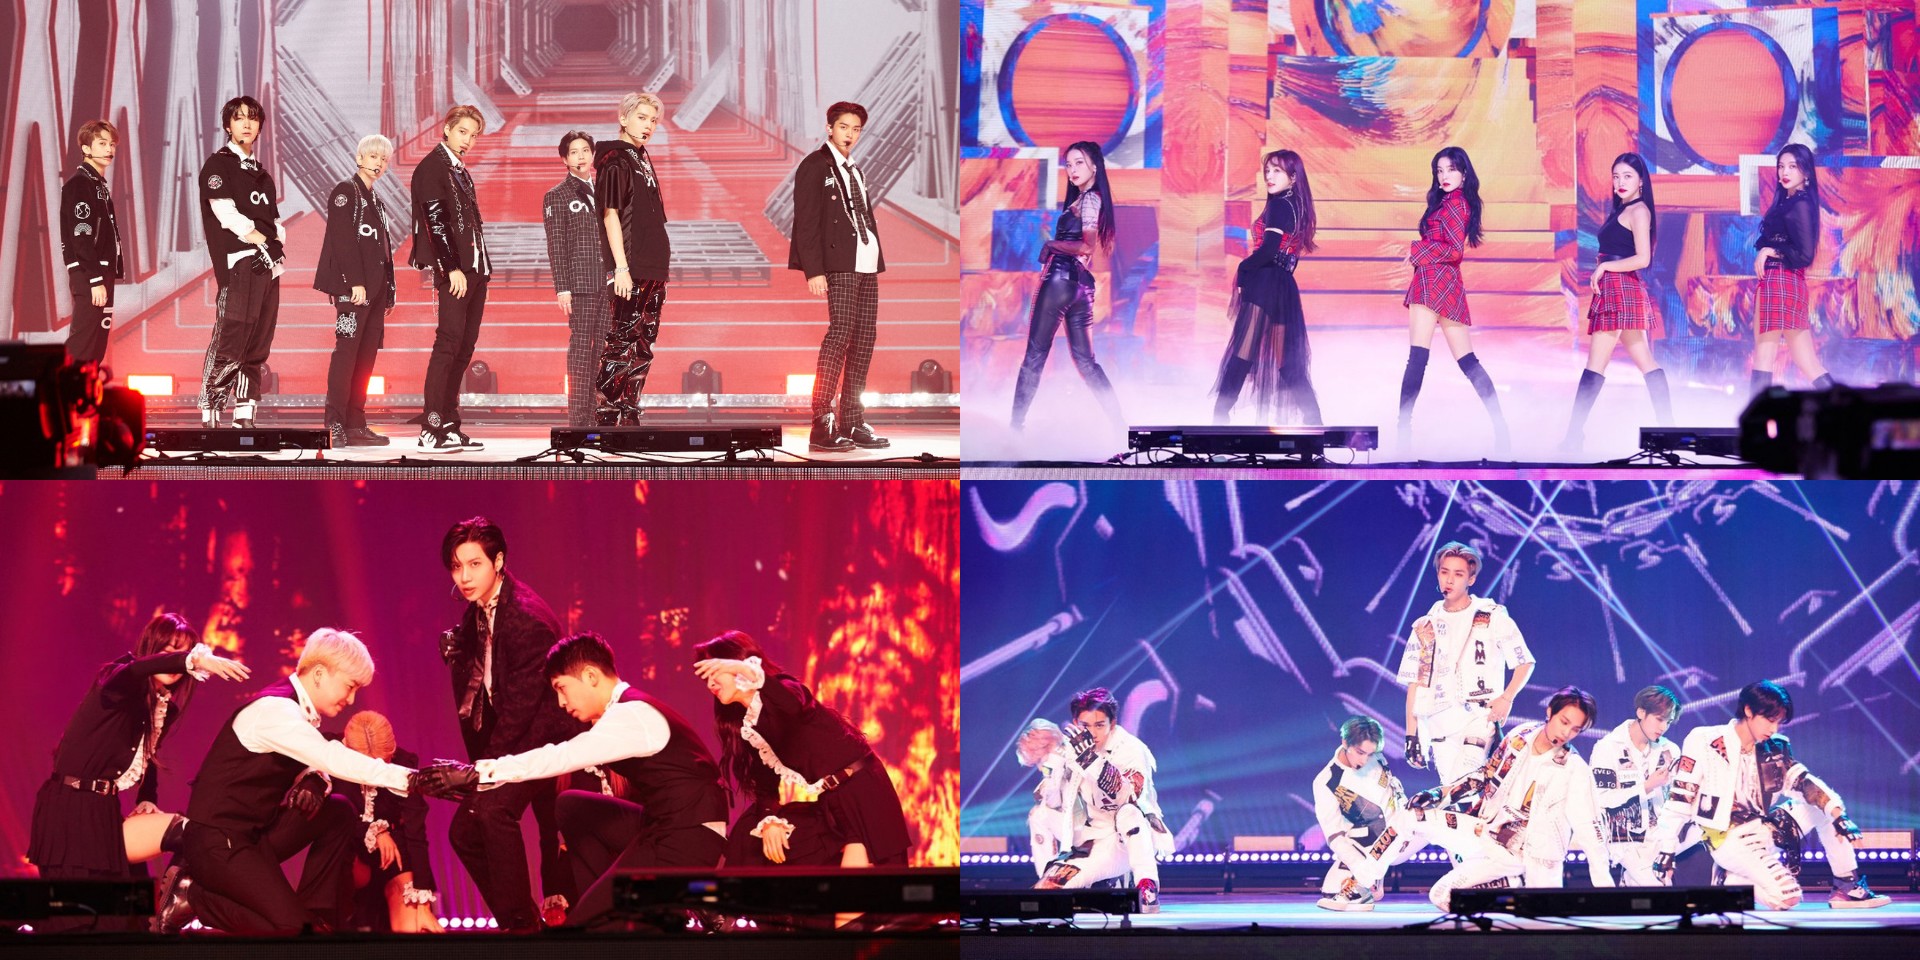 SMTOWN LIVE “Cultural Humanity” sets new record, draws over 35 million viewers across multiple platforms